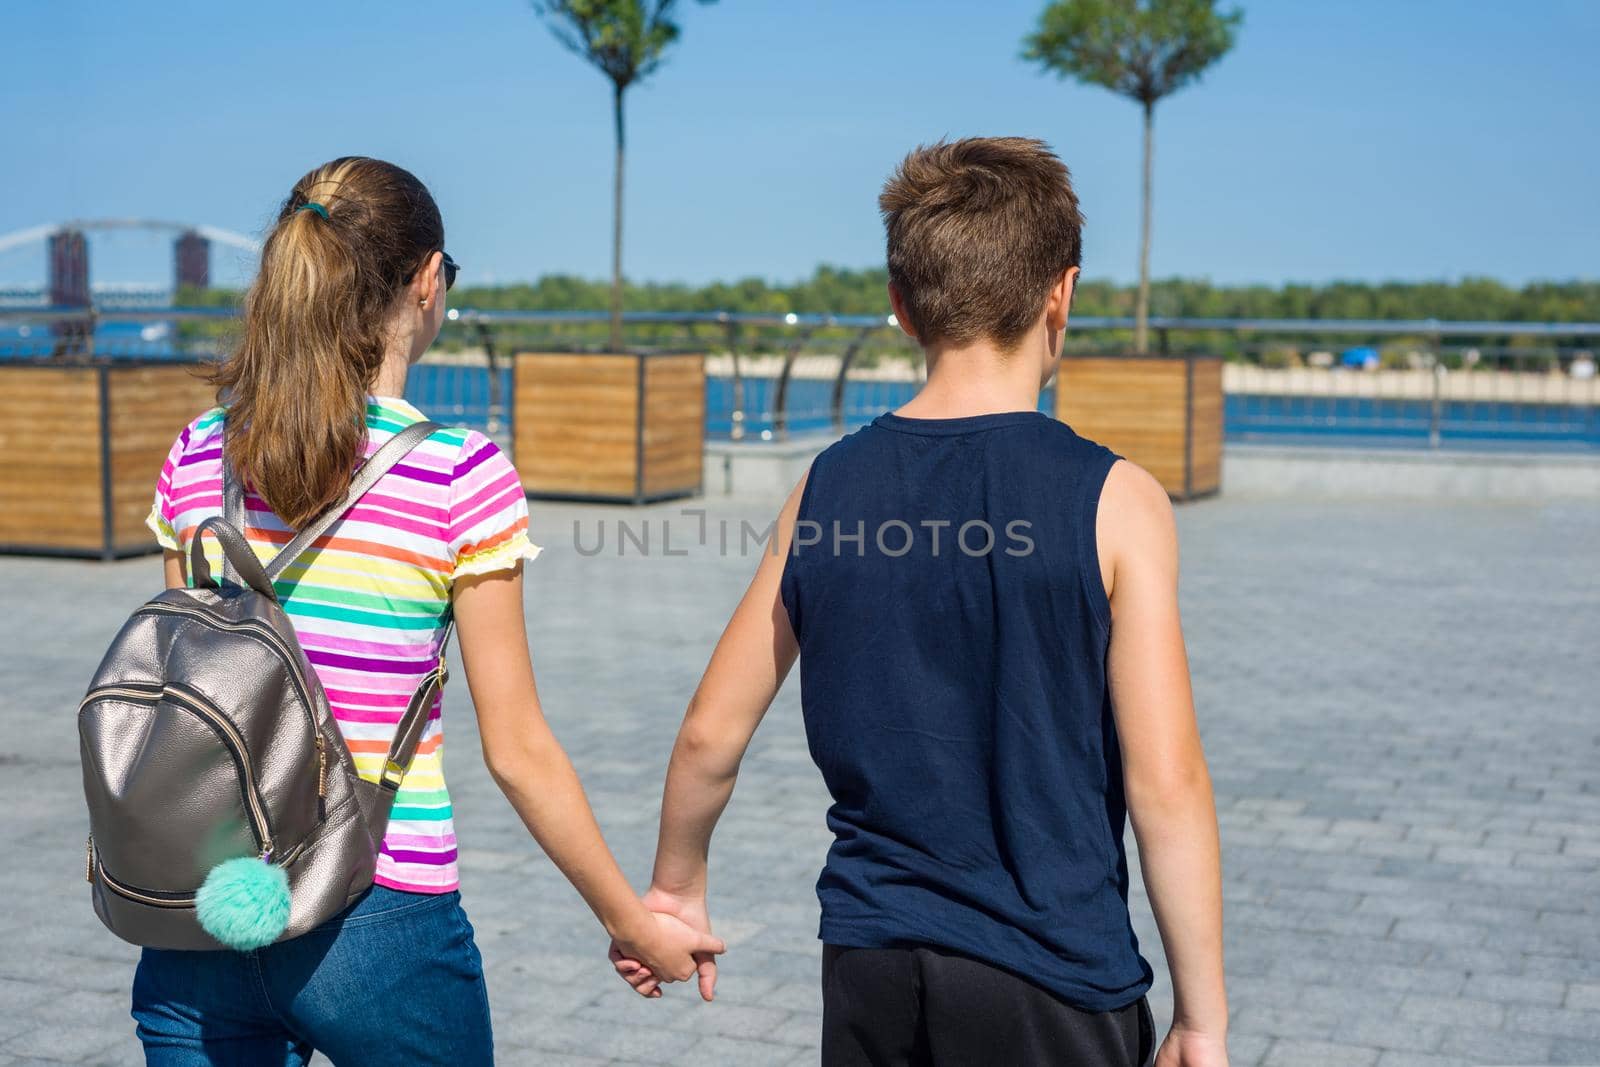 Young couple. View from the back, urban style background.